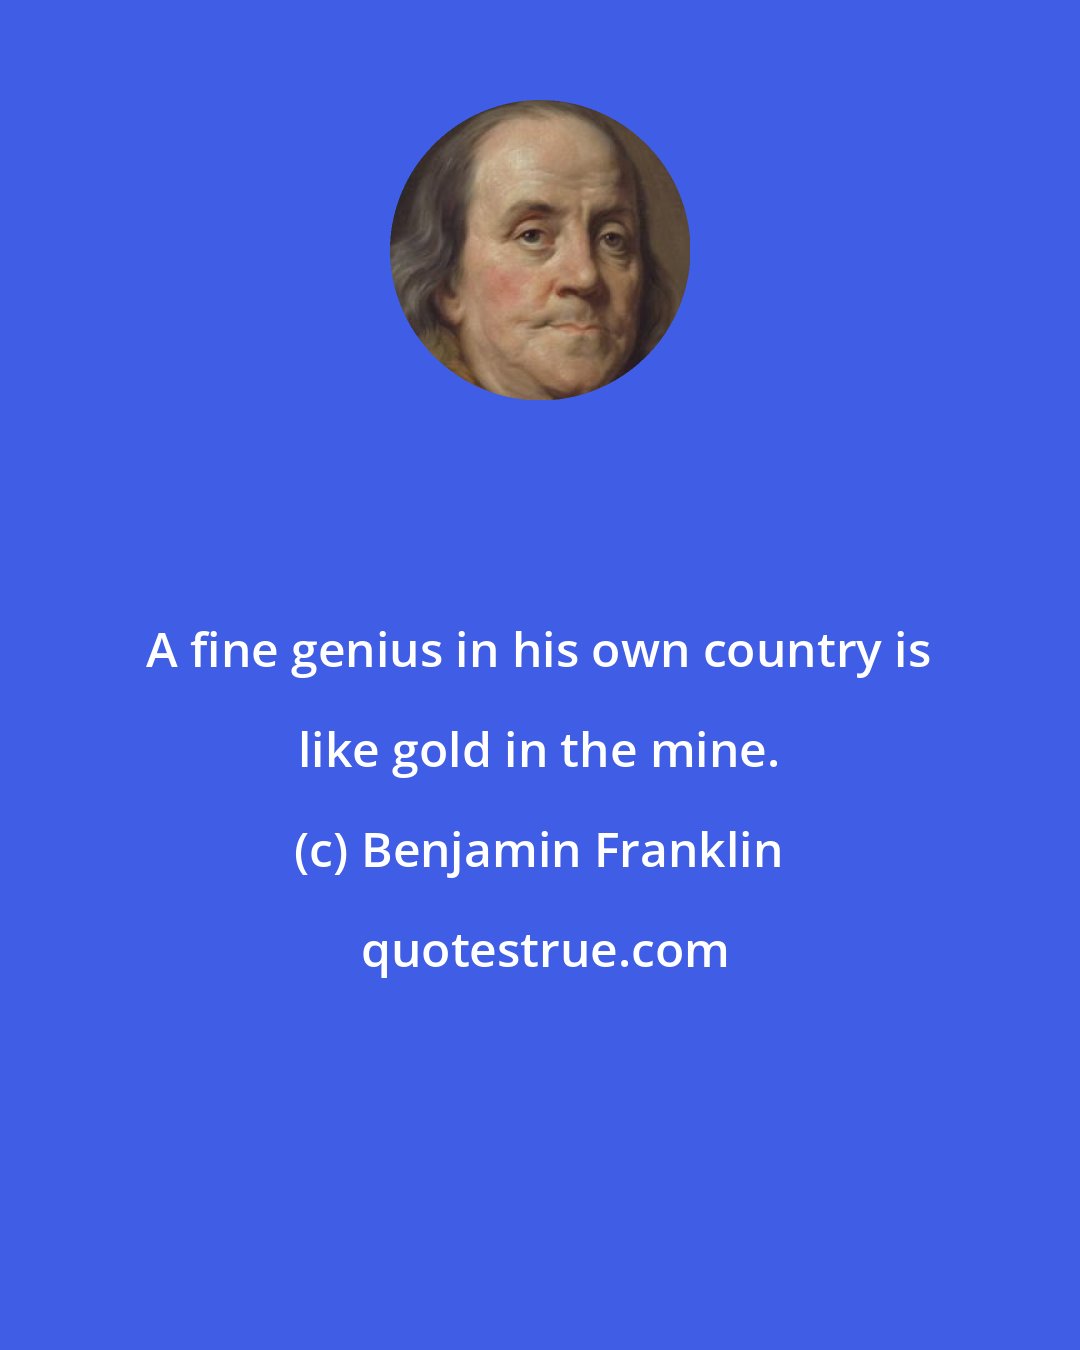 Benjamin Franklin: A fine genius in his own country is like gold in the mine.